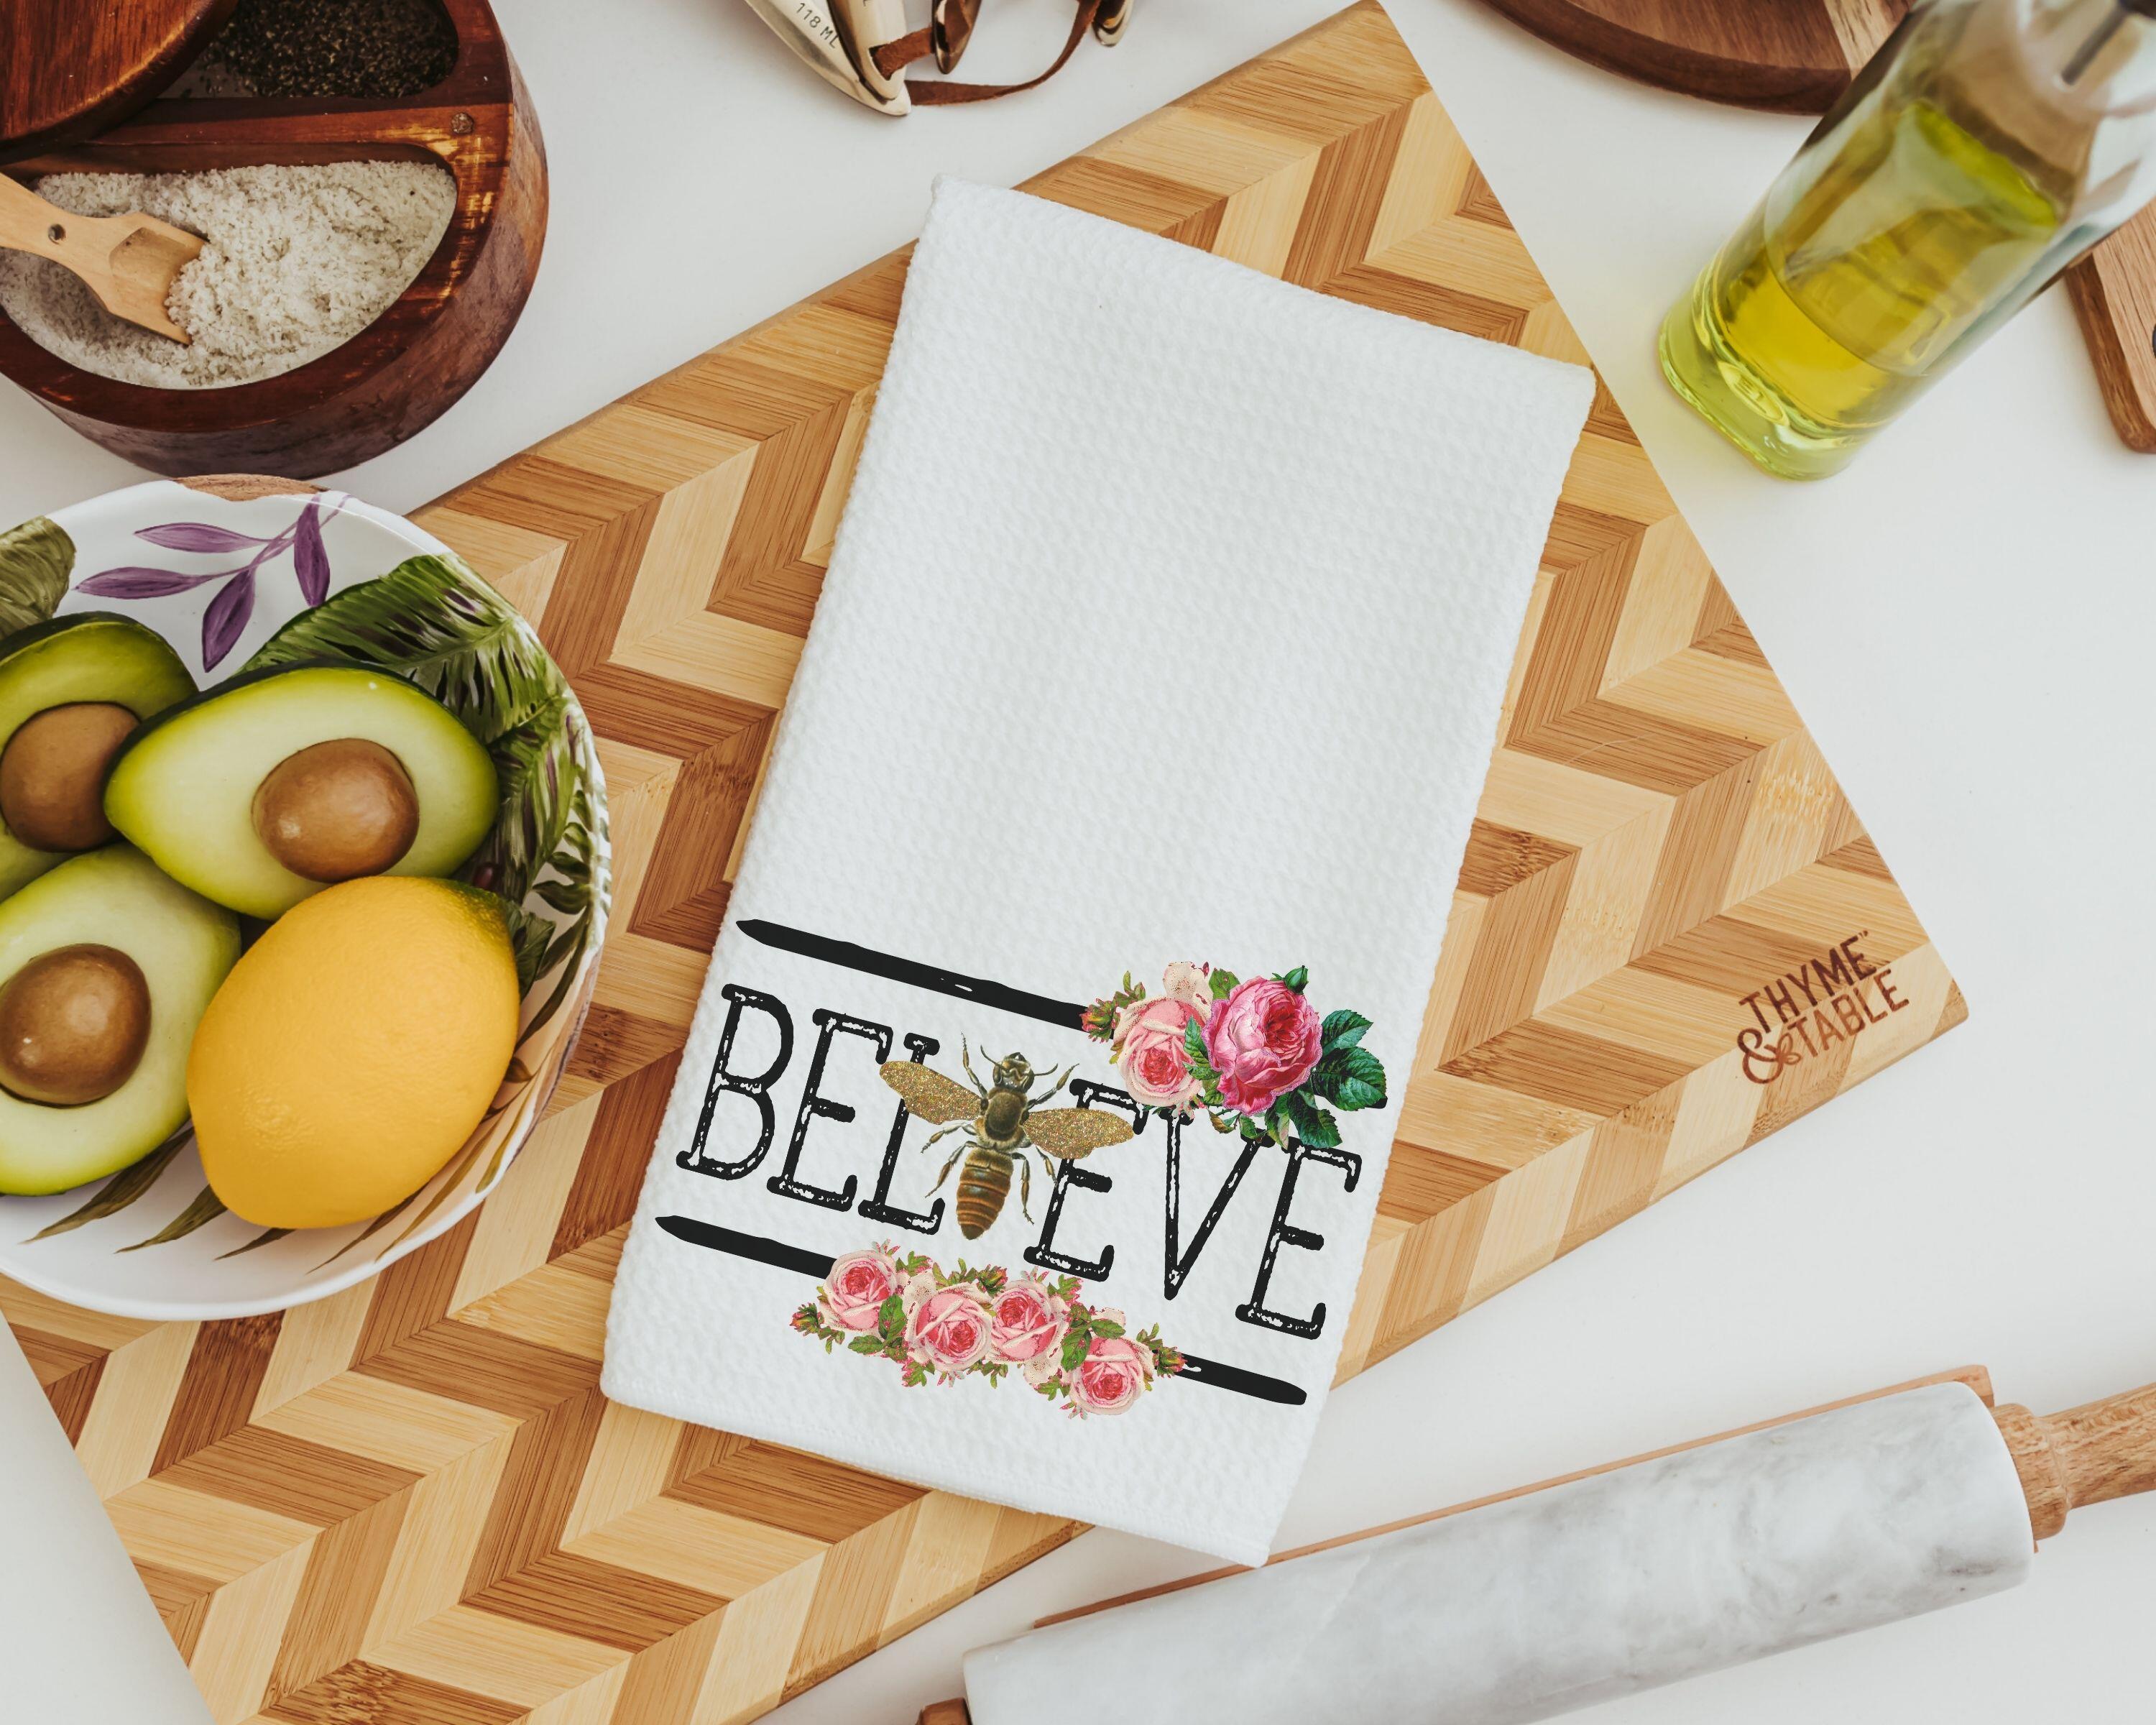 Floral bee hand towels